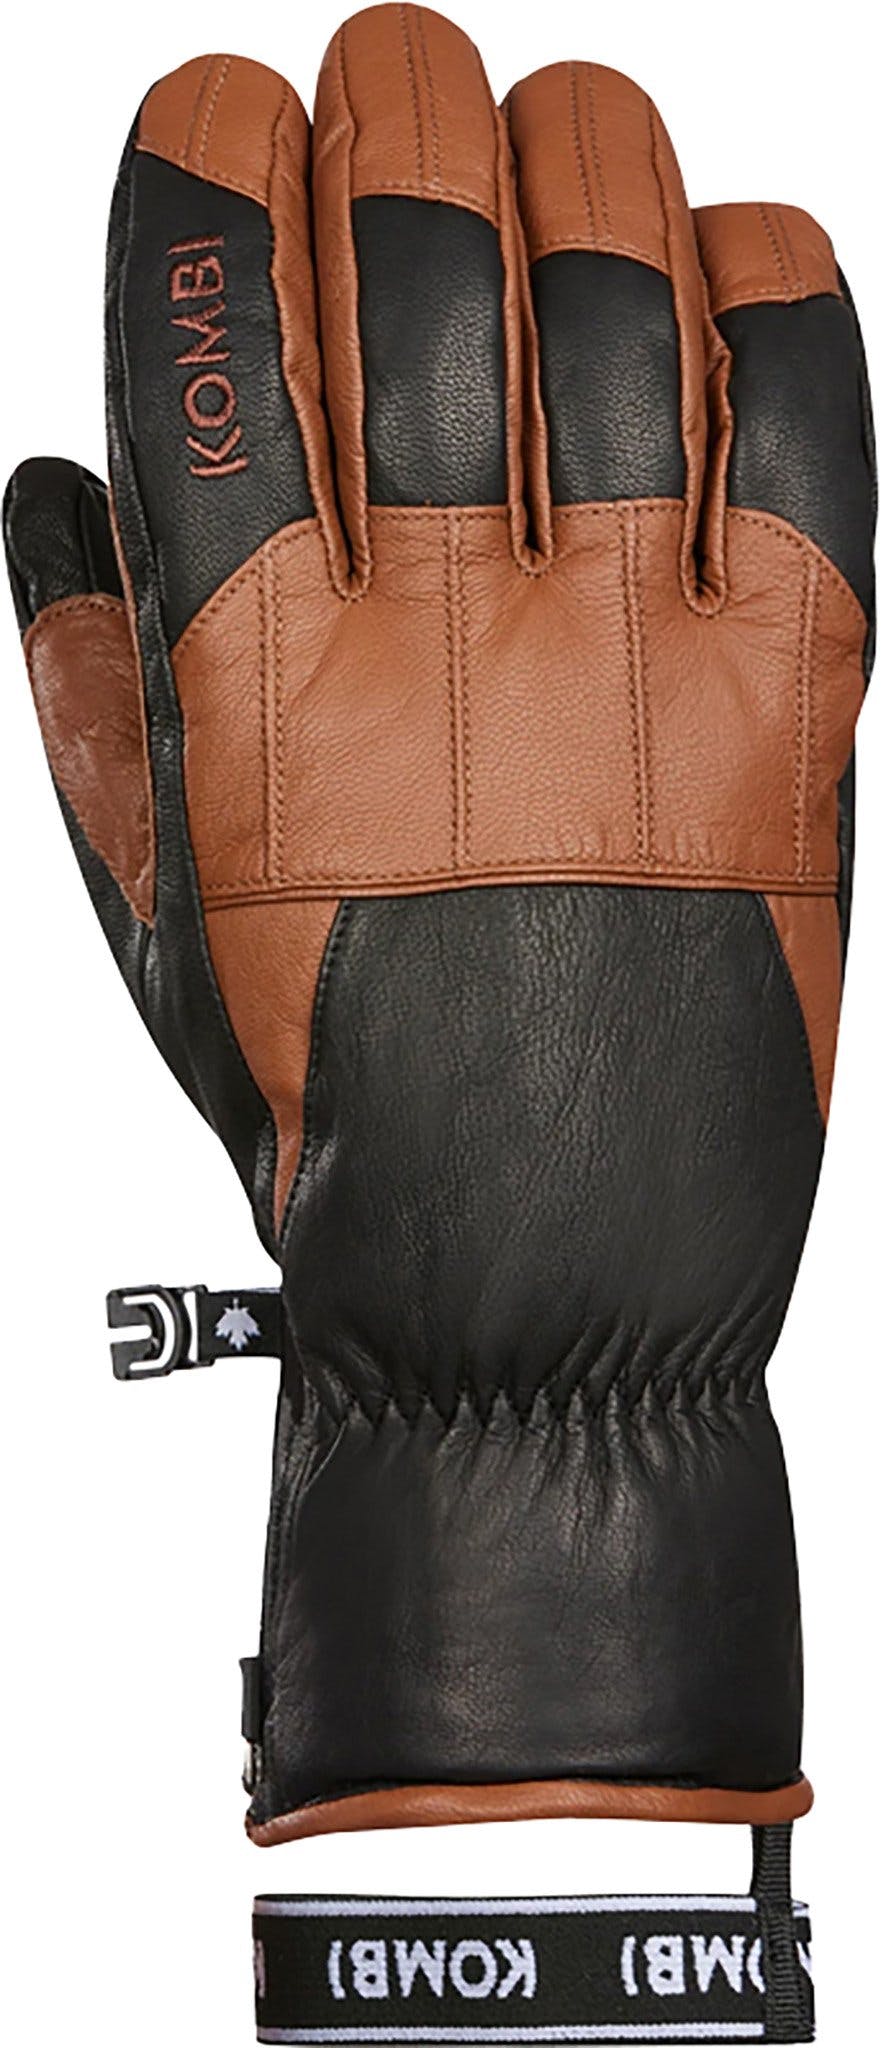 Product image for The Free Fall Gloves - Men's